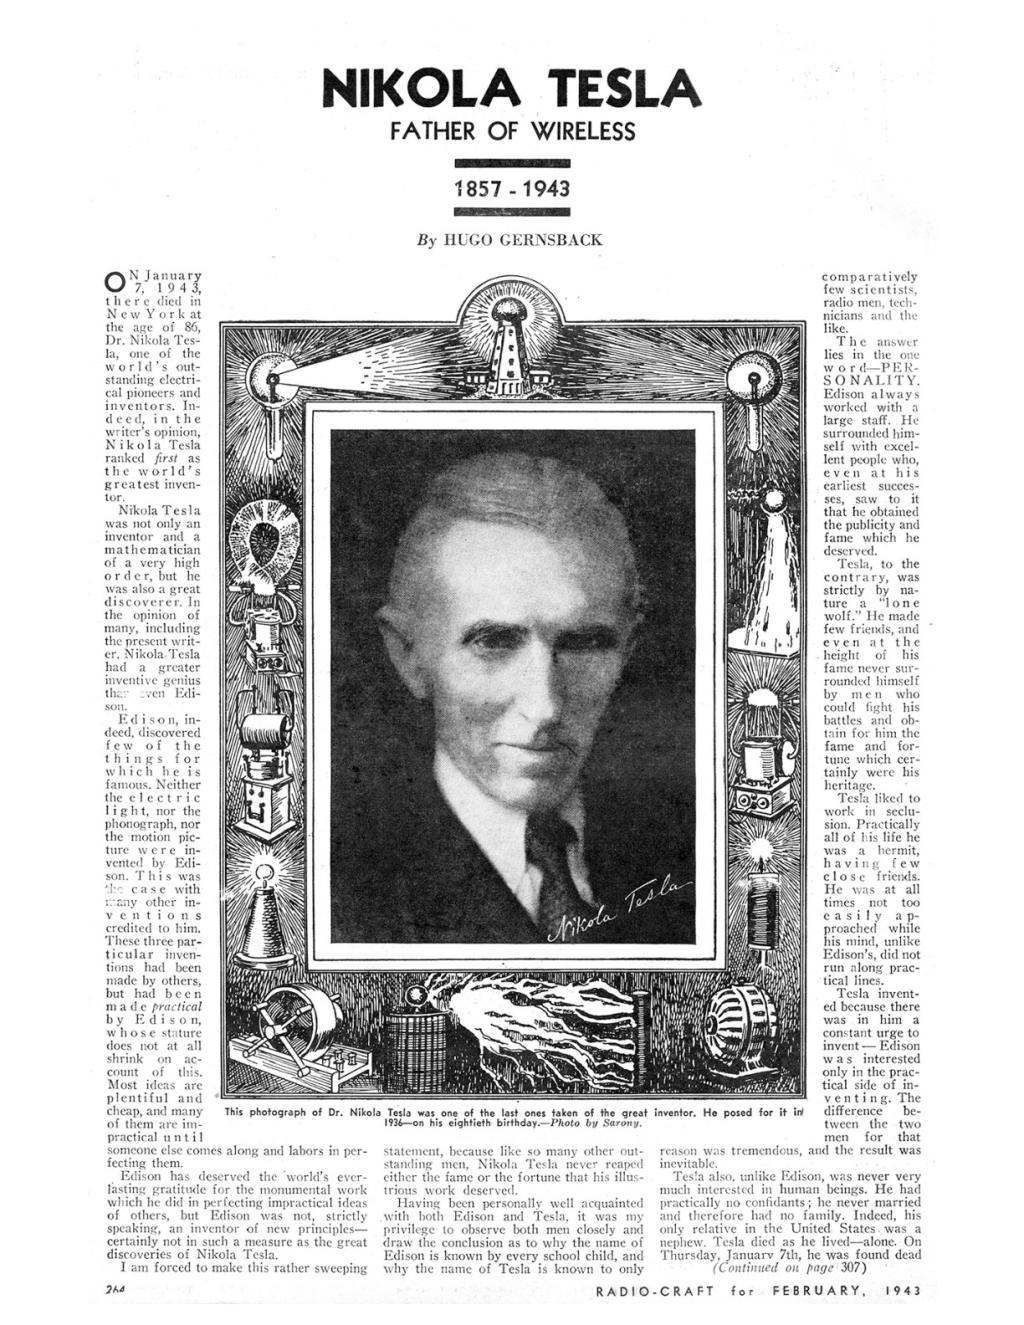 Preview of Nikola Tesla - Father of Wireless article